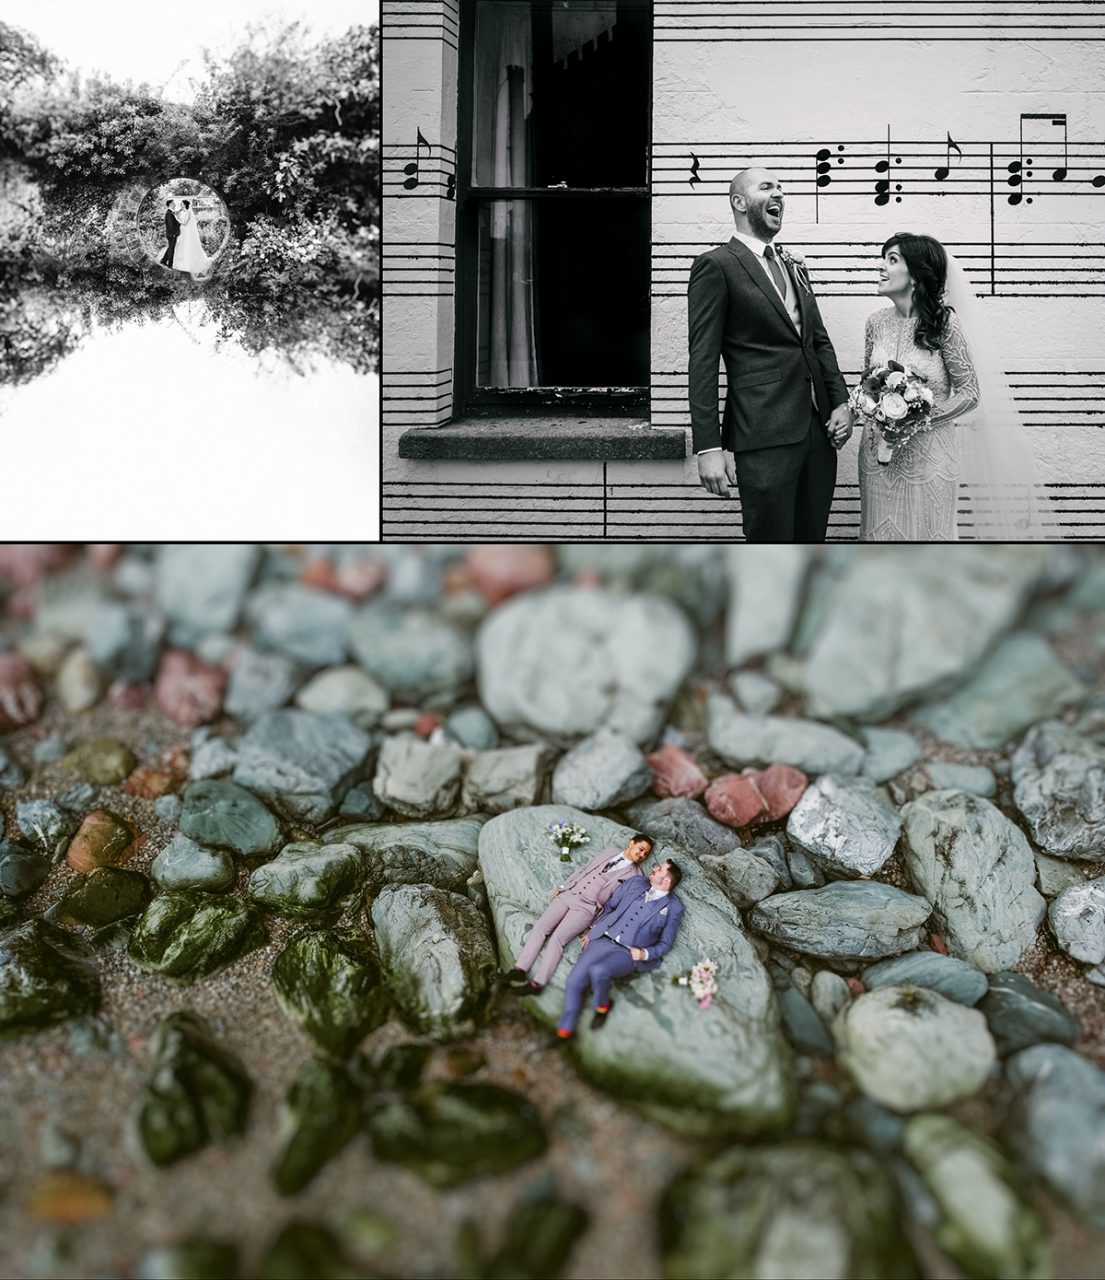 Creative Wedding Photographs by Phil Voon, Runner-Up of the Creative Wedding sub-category